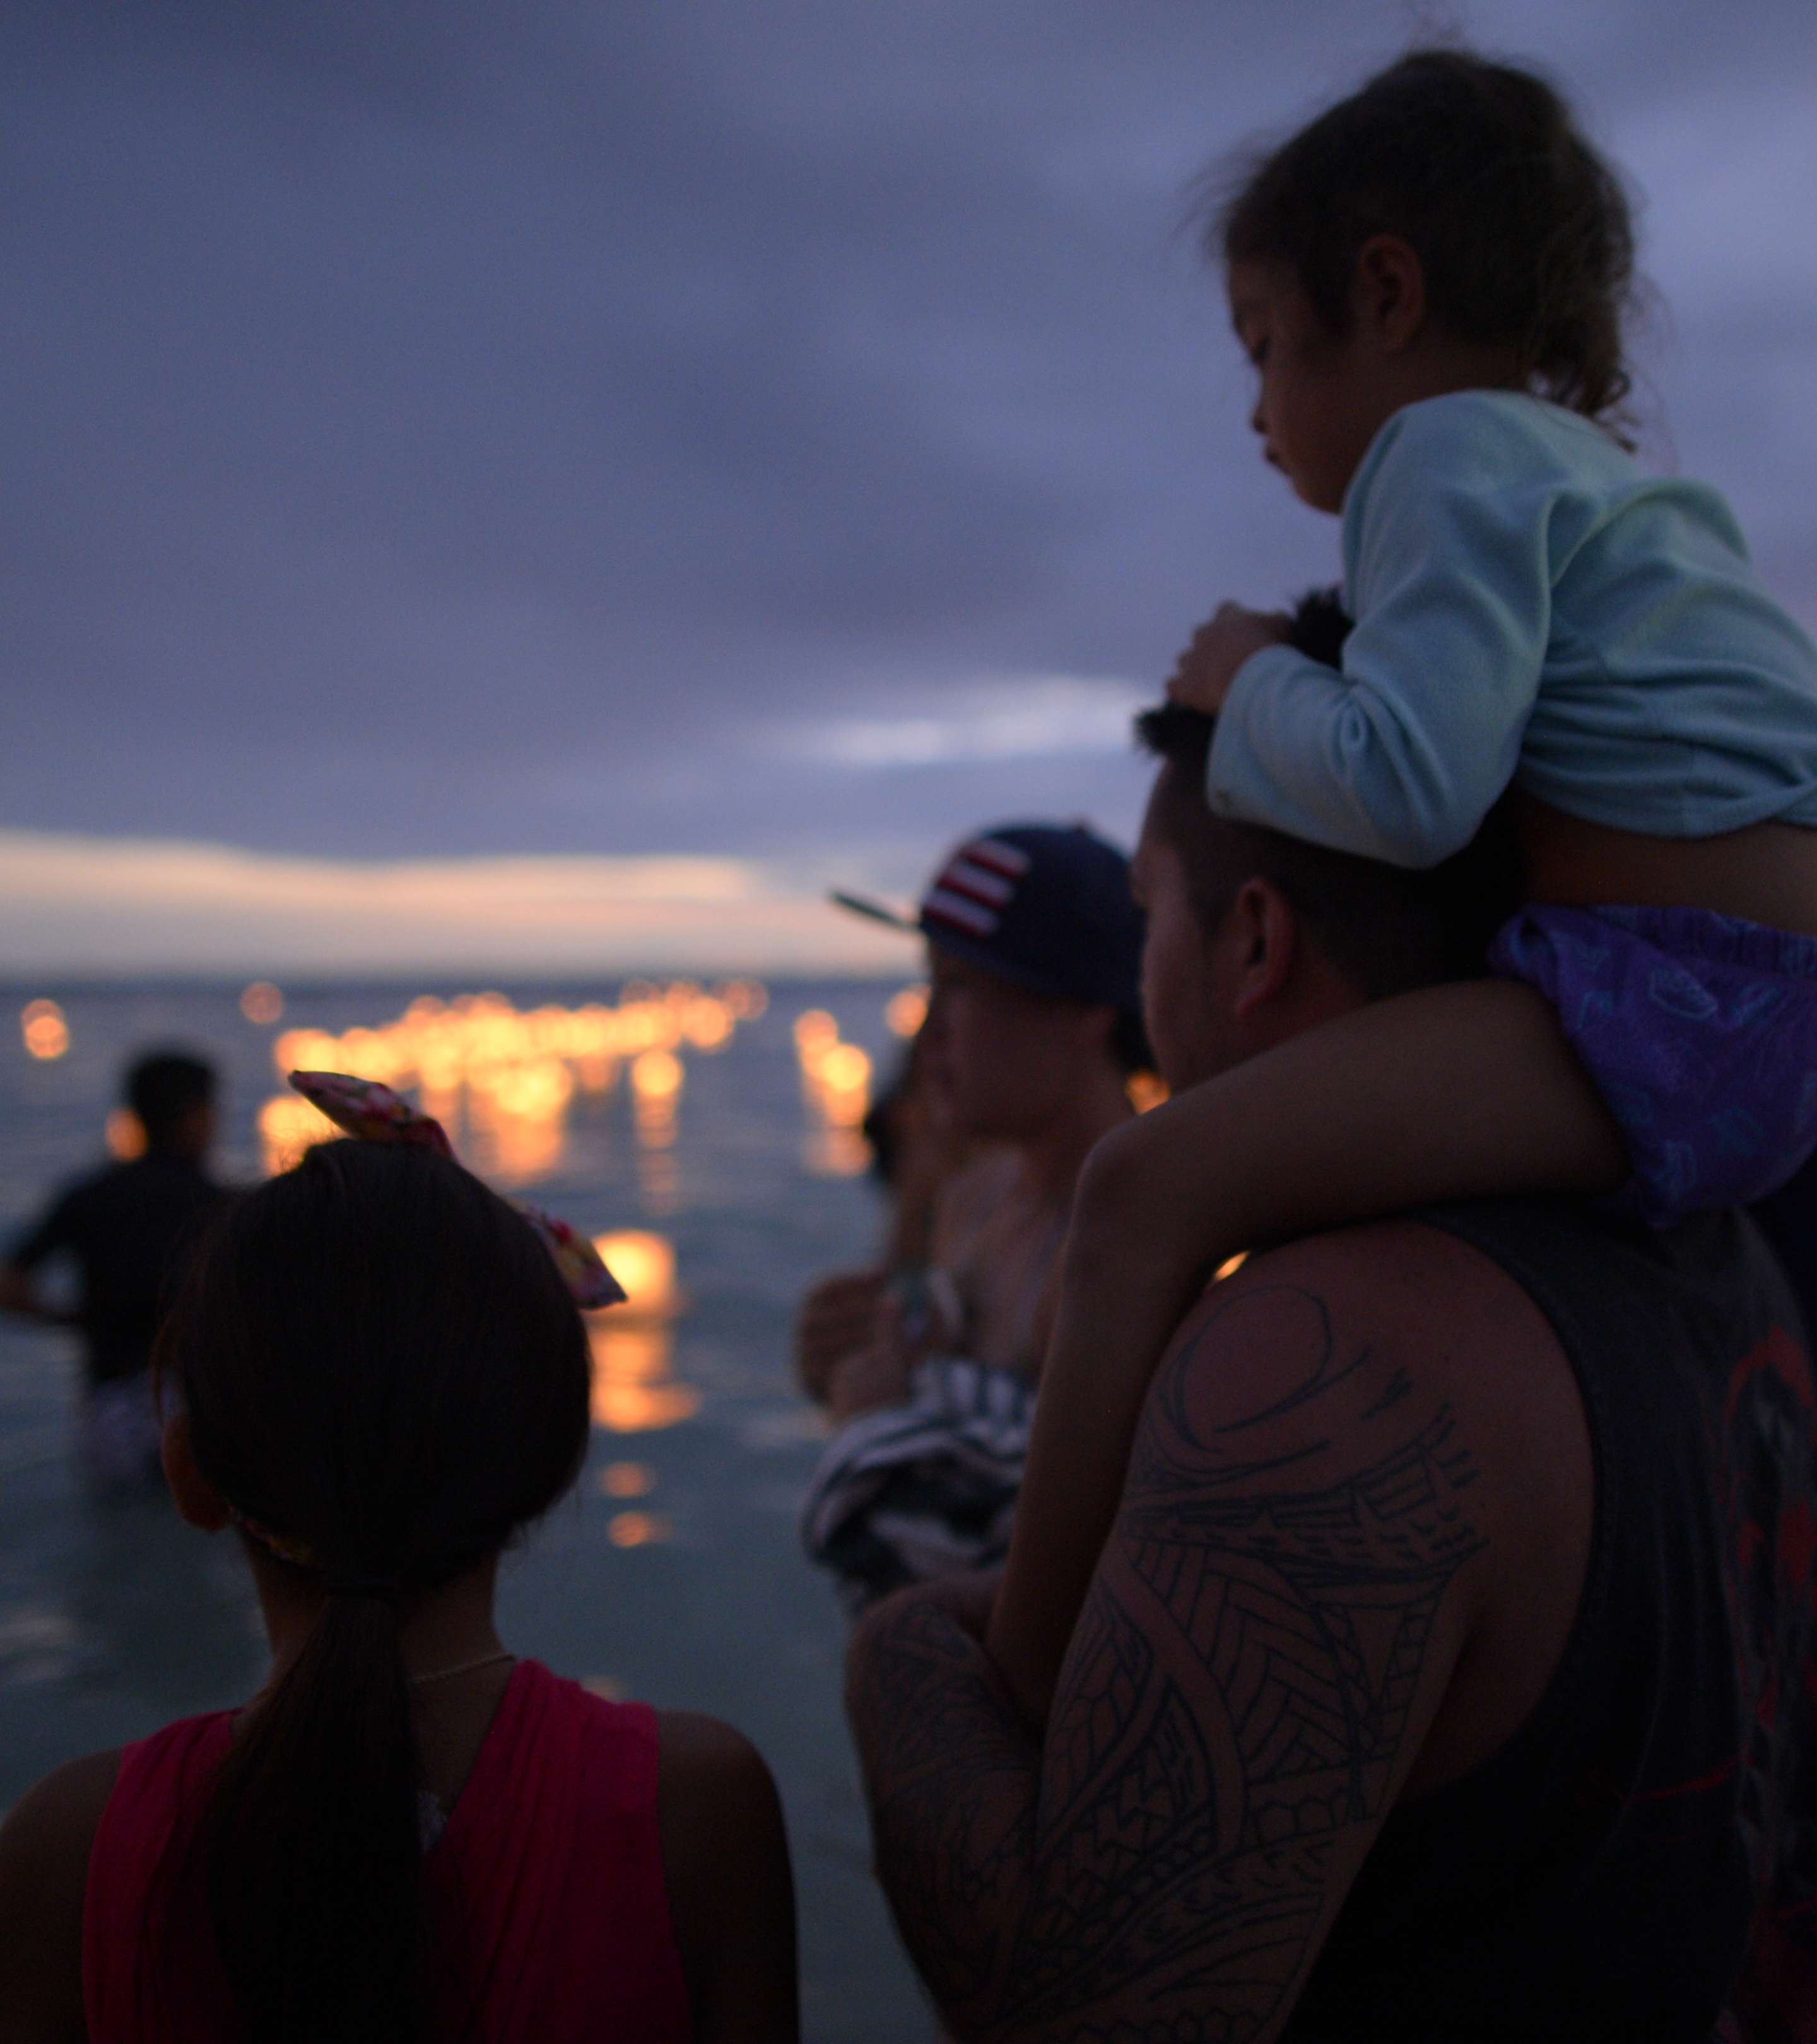 At dusk a father wading in the sea, holds a child on his shoulders as people look on at glowing lanterns floating in the distance.